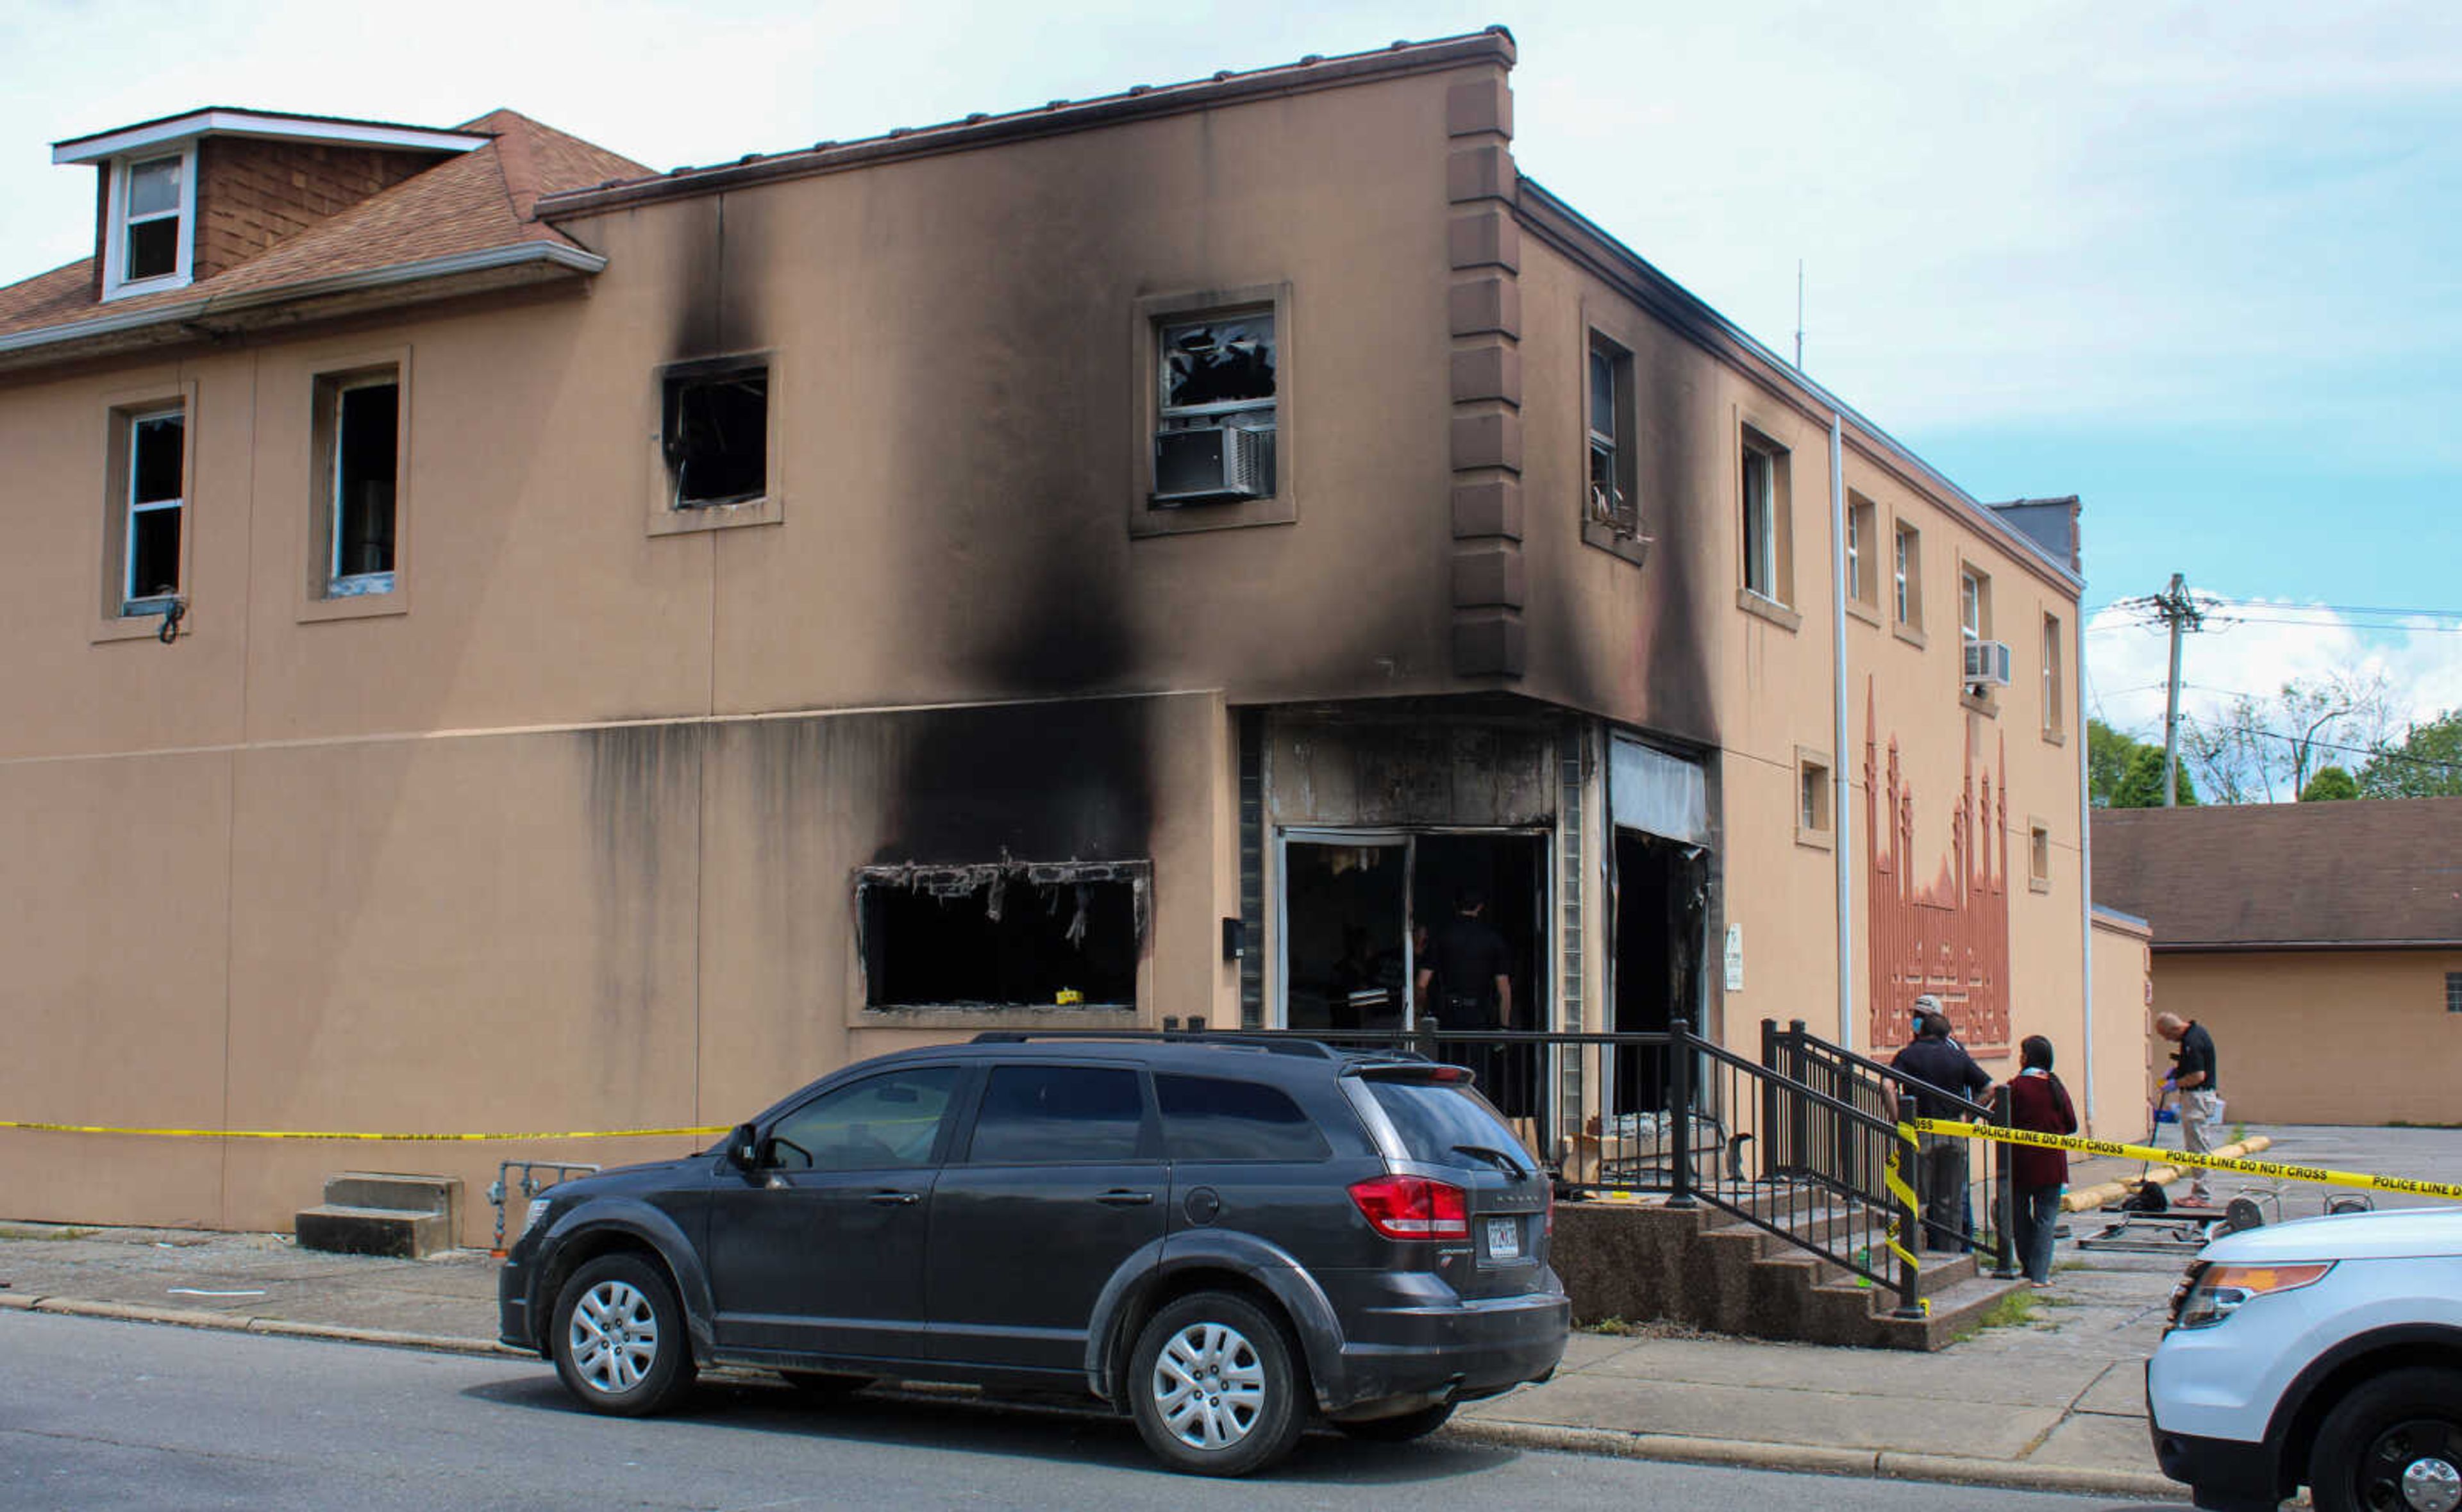 The Islamic Center of Cape Girardeau, located at 298 N. West End Blvd. is seen after a structure fire damaged the building on Friday, April 24.